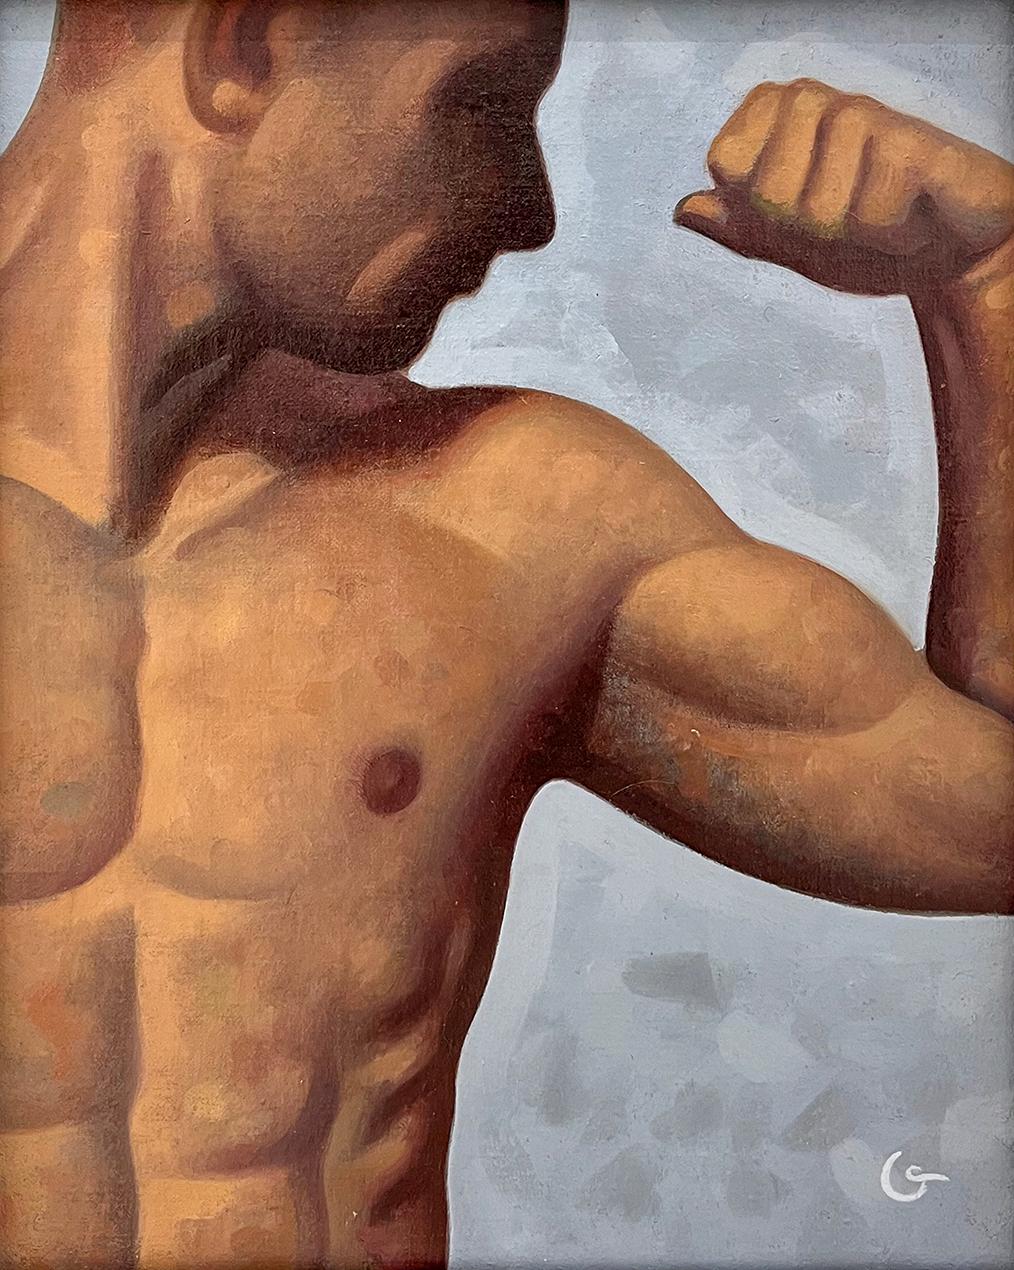 Figurative painting of male nude torso on a blood orange background
"Anatomy Lesson No. 67, Study", painted by Hudson Valley artist, Robert Goldstrom in 2023
oil on linen panel 
10 x 8 inches unframed, 11 x 9 x 1.5 inches in white wood frame
Signed,